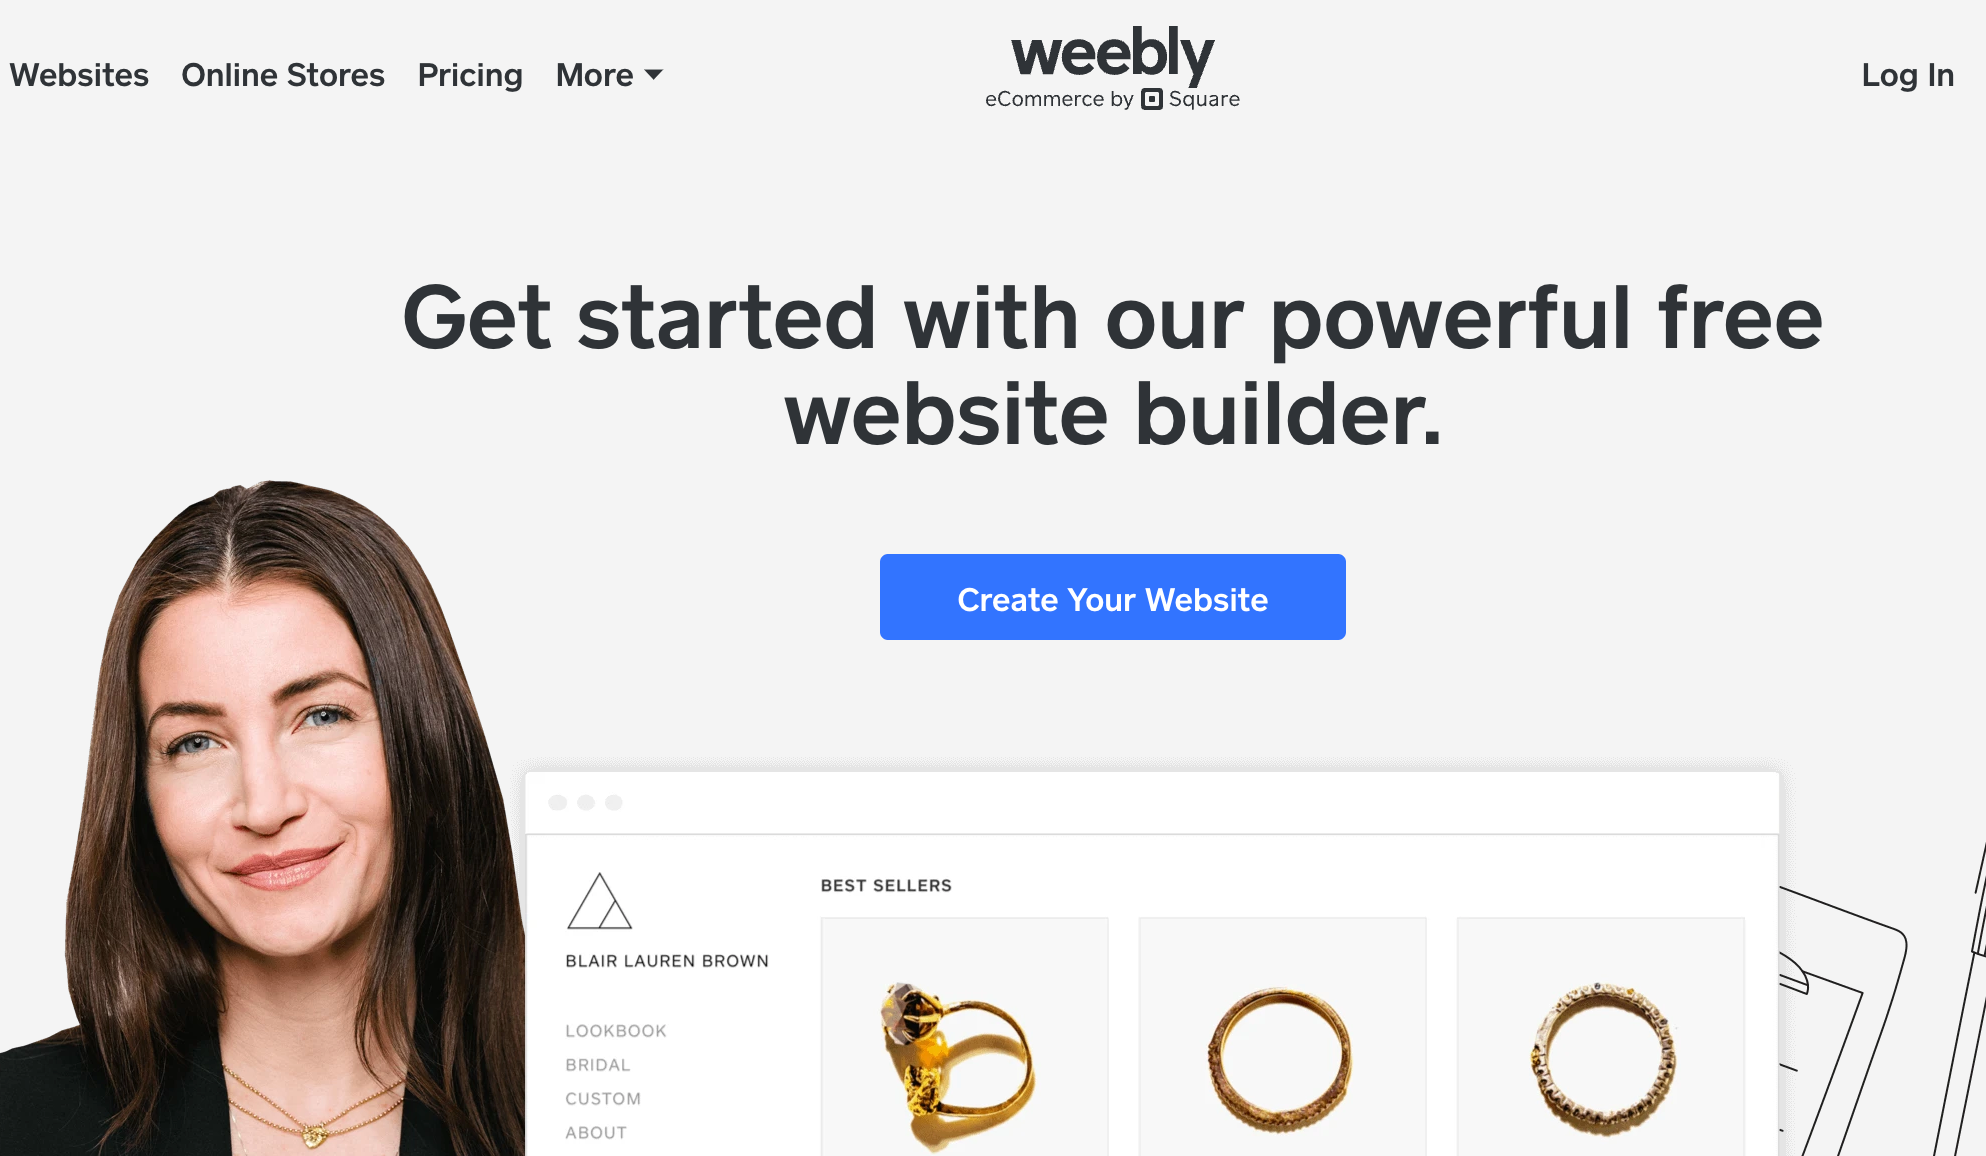 weebly-home-page-overview